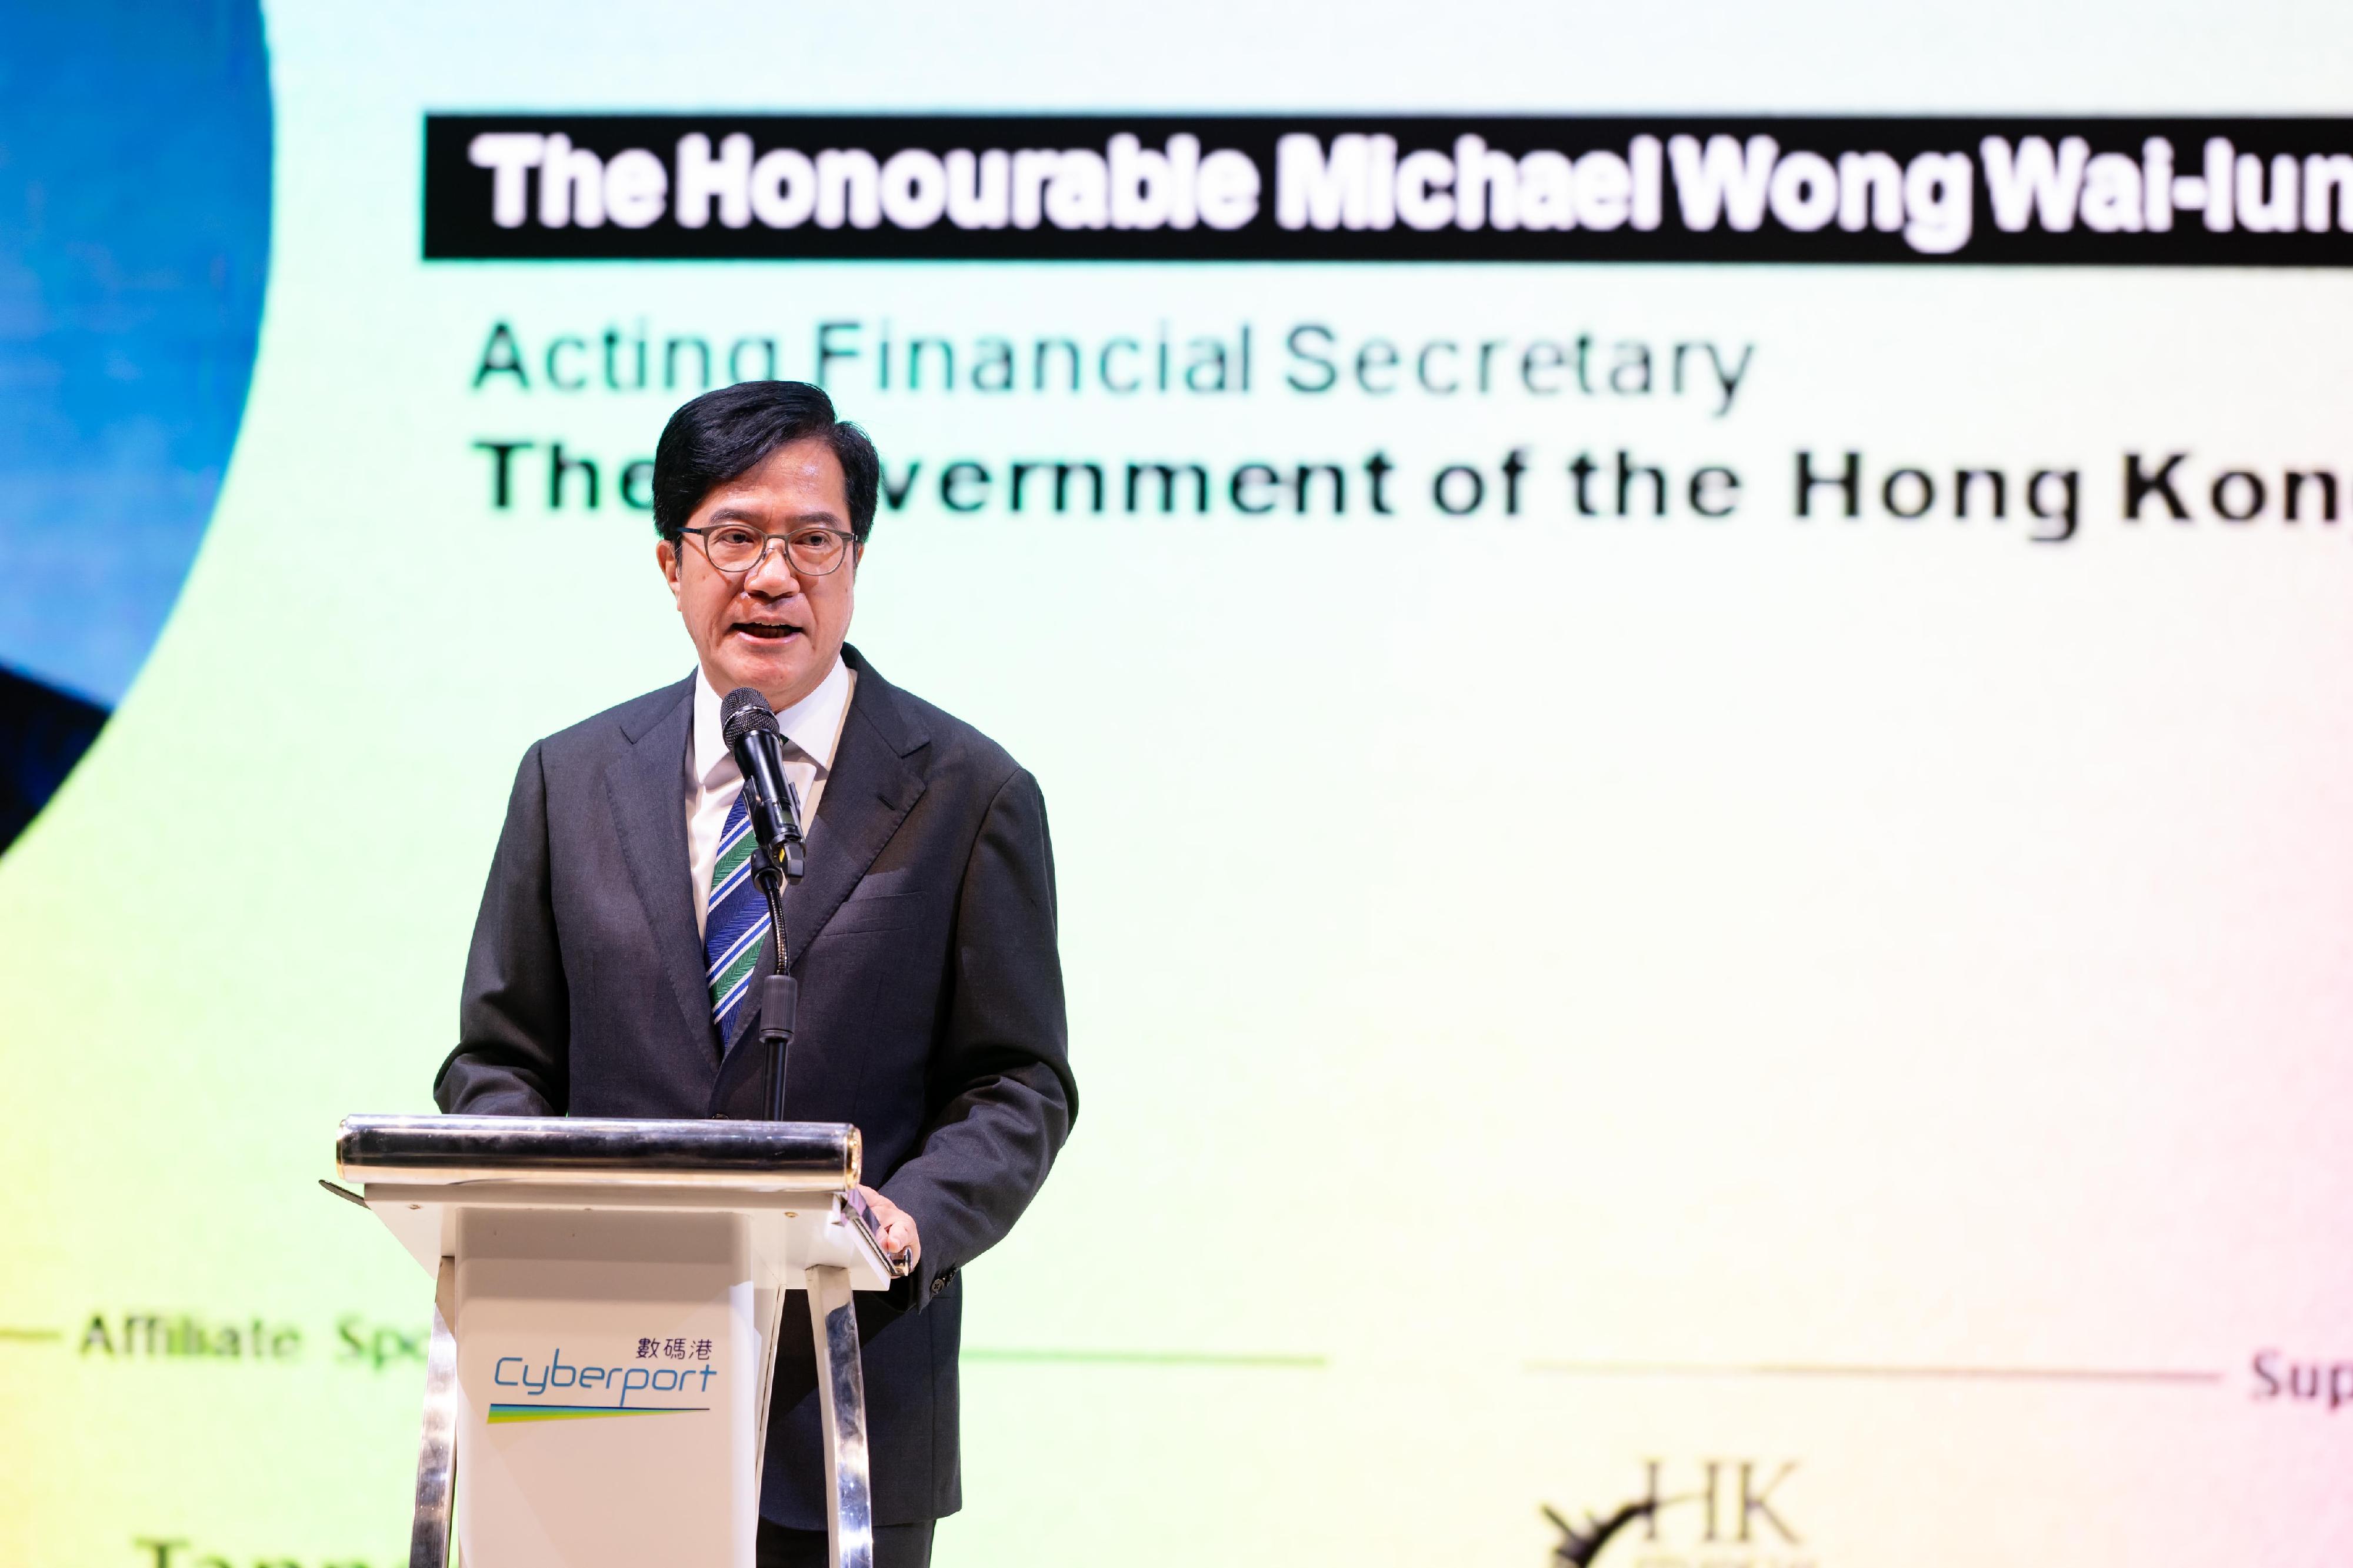 Photo shows the Acting Financial Secretary of the Hong Kong Special Administrative Region, Mr Michael Wong, delivering his opening remarks to kick off the two-day spectacle at Game On! 2023.

